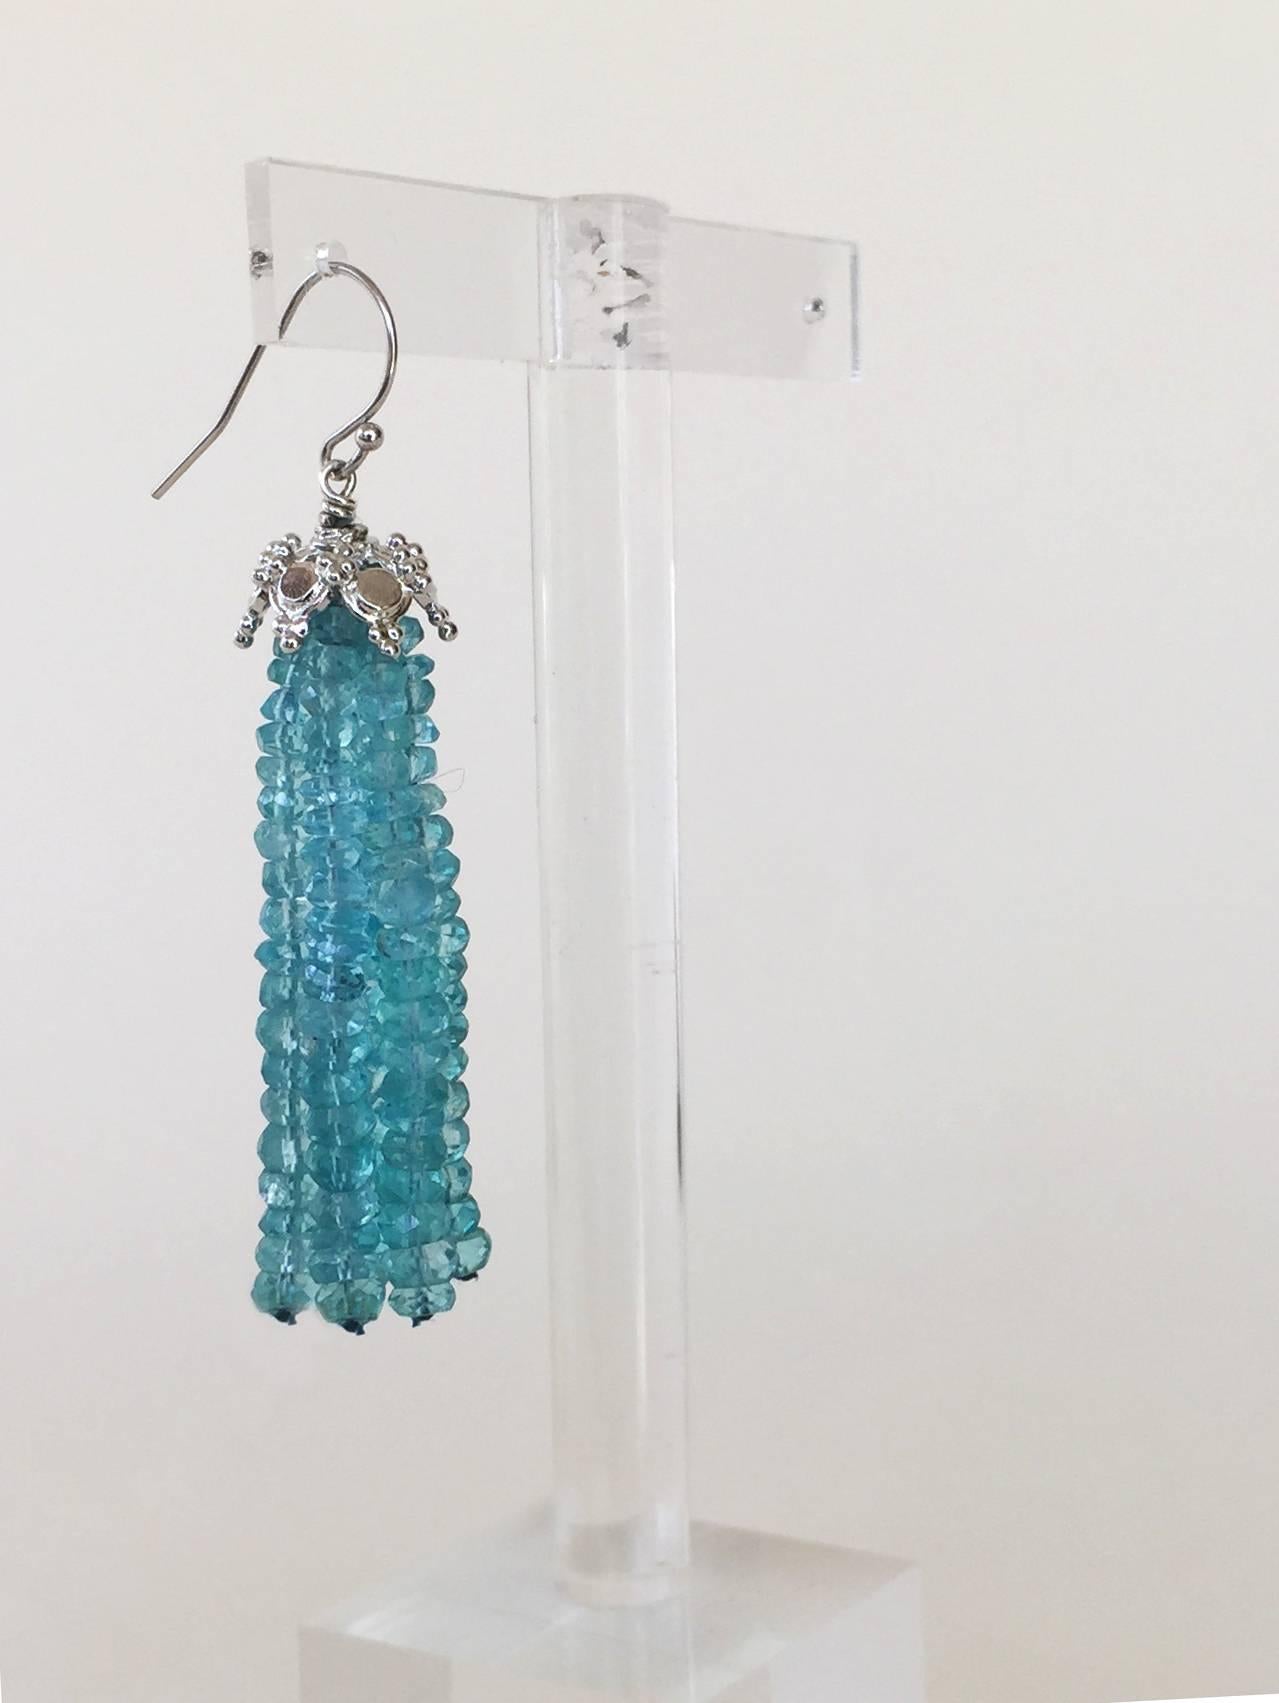 These whimsical earrings are made with graduated translucent blue topaz faceted beads. They are accented with a gracefully designed gold plated silver cups that highlights the graduated tassel. At 2.4 inches long the tassels flow beautifully in time